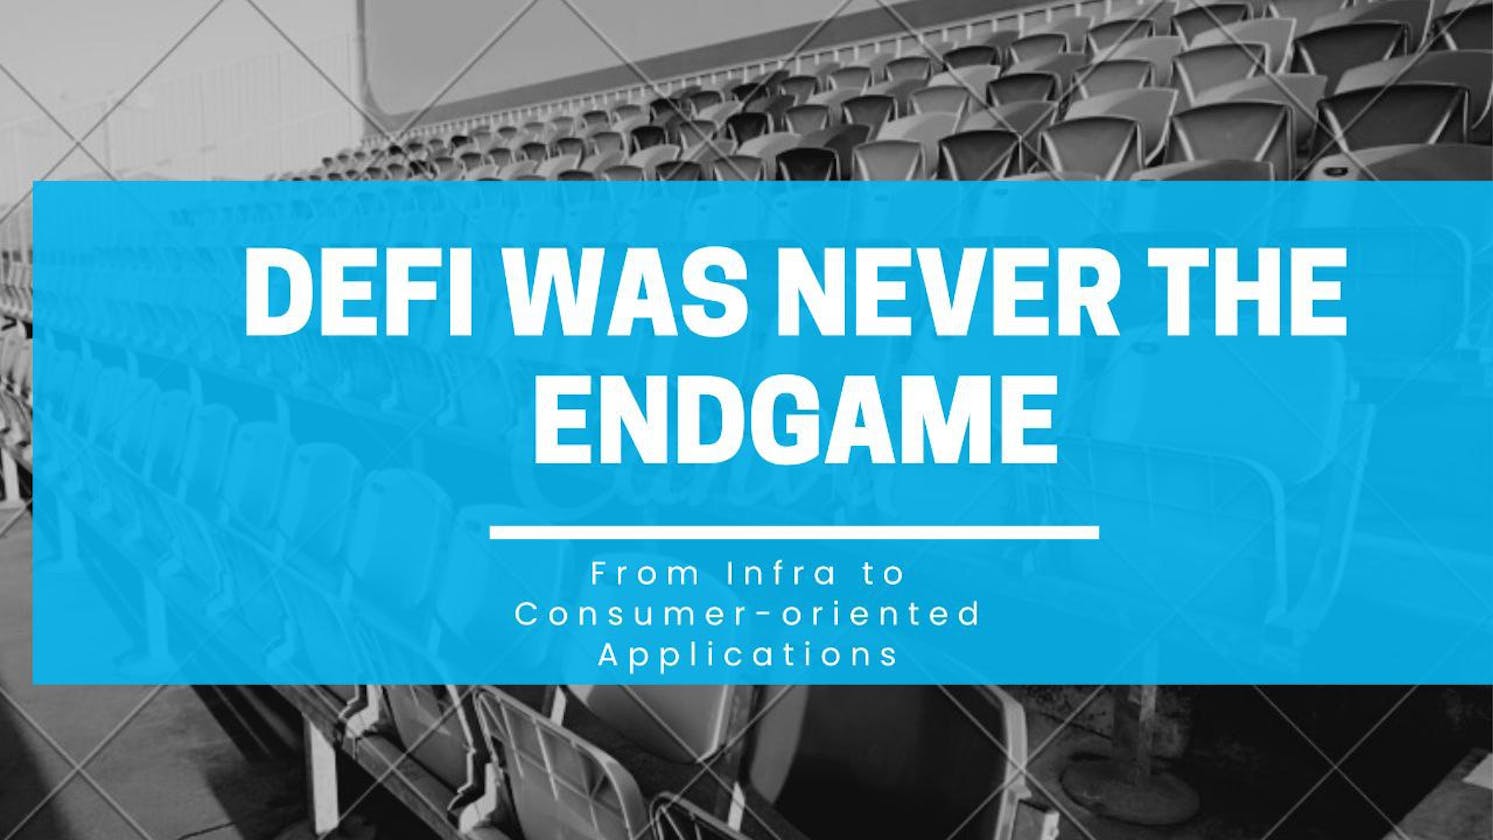 DeFi Was Never The Endgame